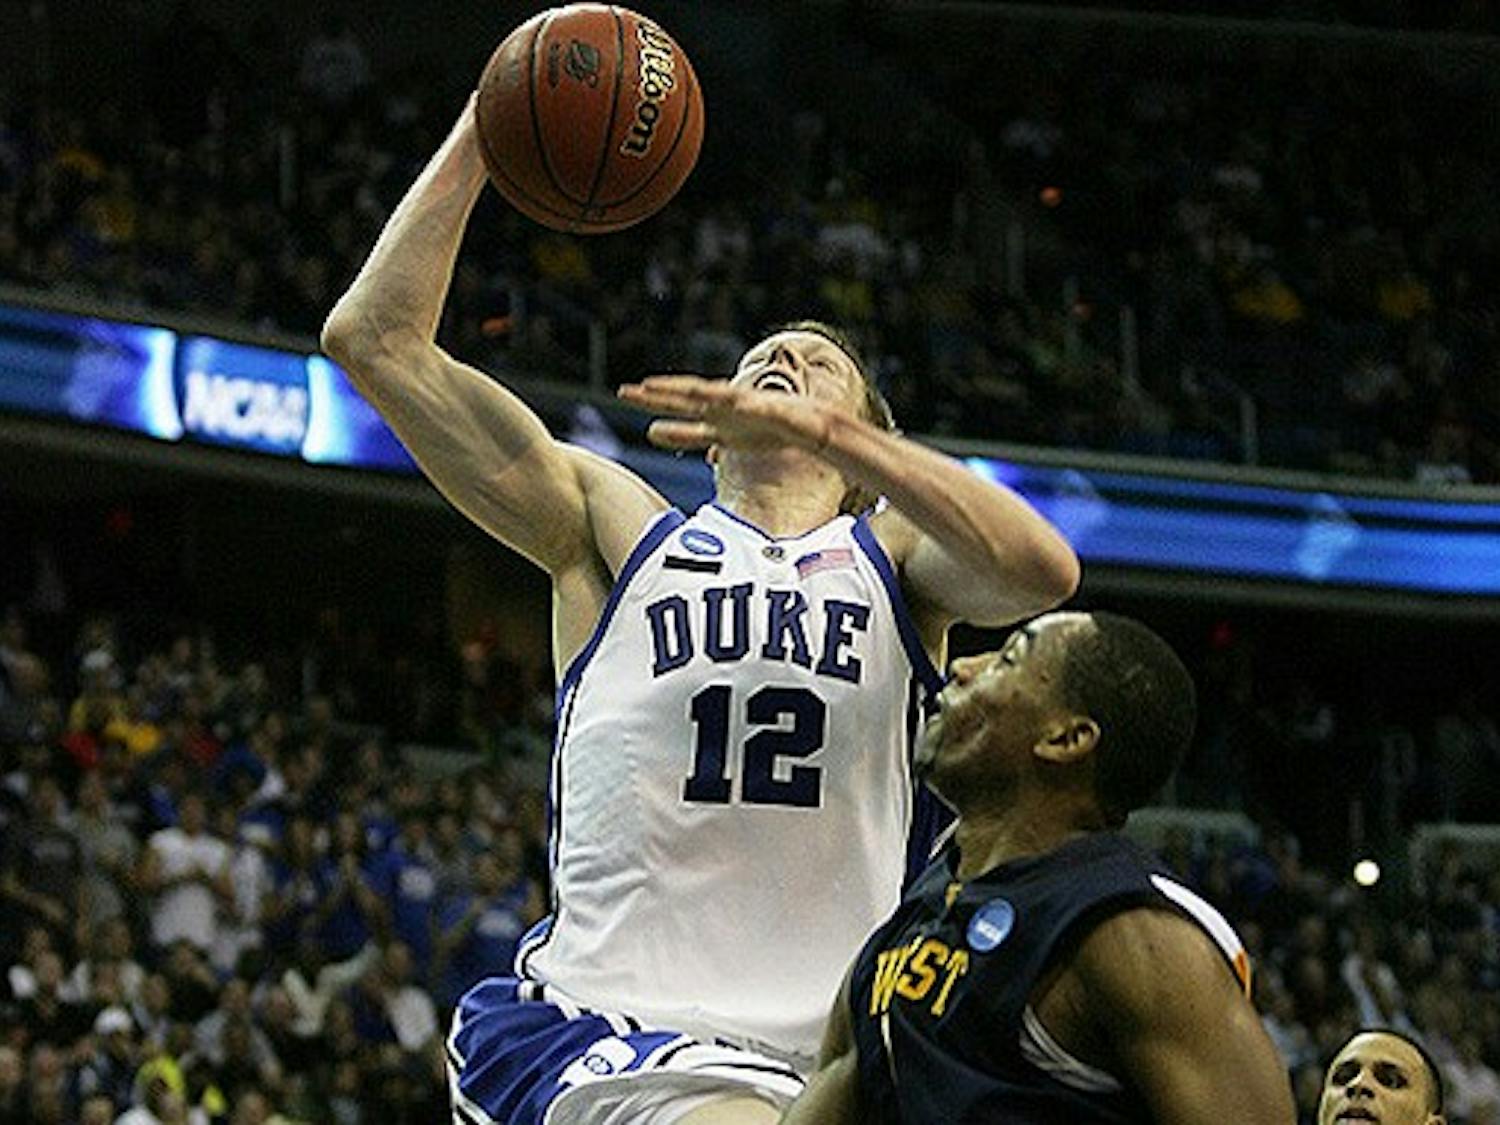 Duke’s Kyle Singler and West Virginia’s Da’Sean Butler will likely be matched up on defense Saturday.